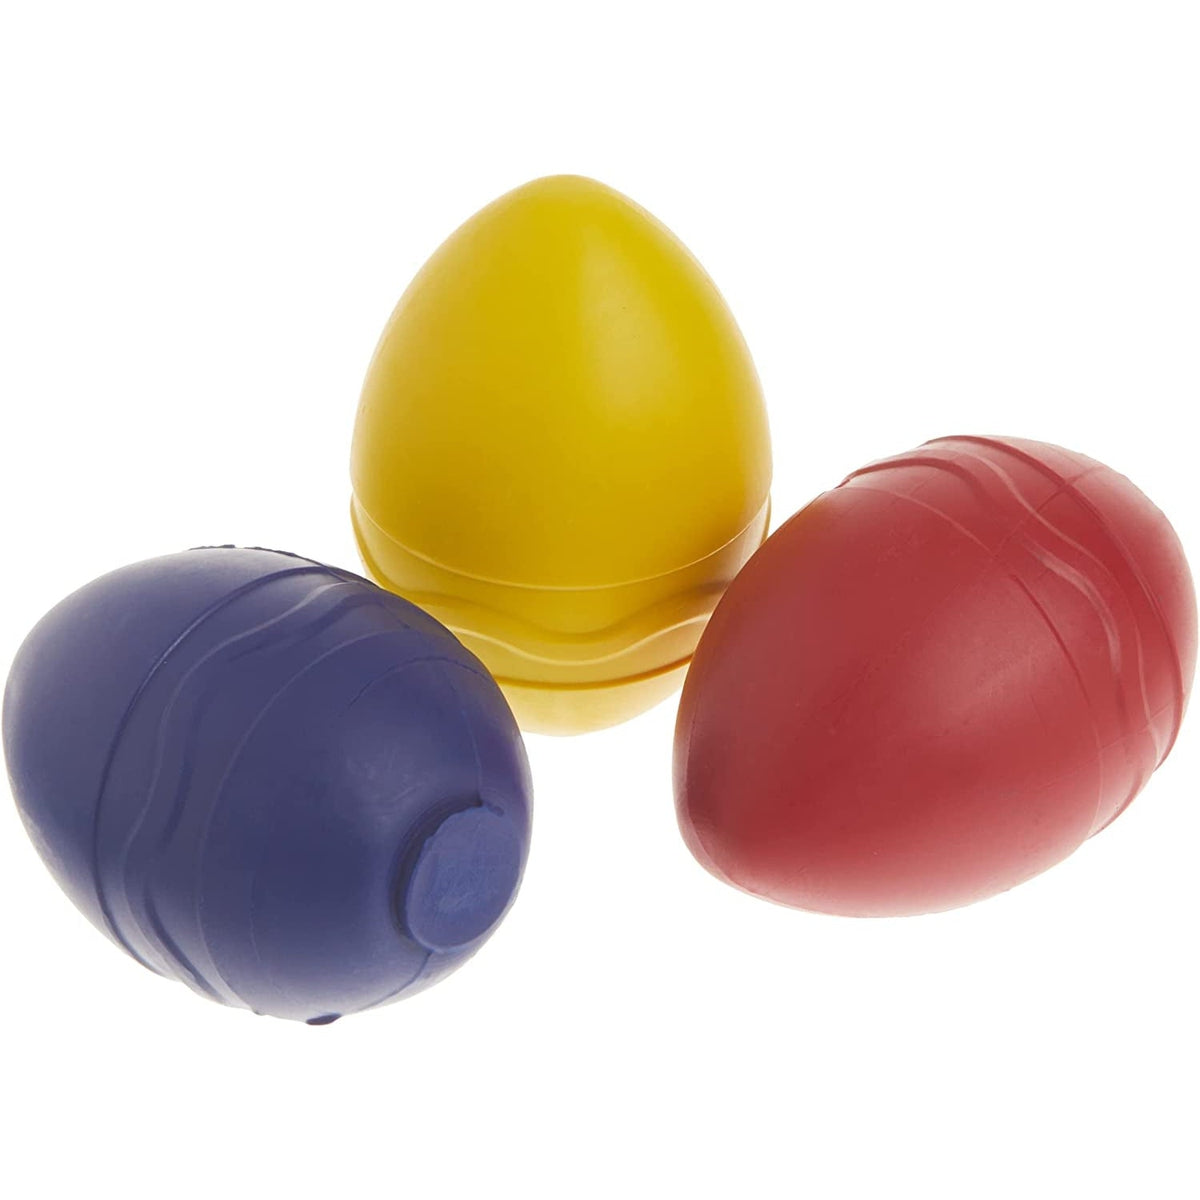 Crayons Toddlers, 9 Colors Egg Crayons Palm Grasp Crayons for Kids